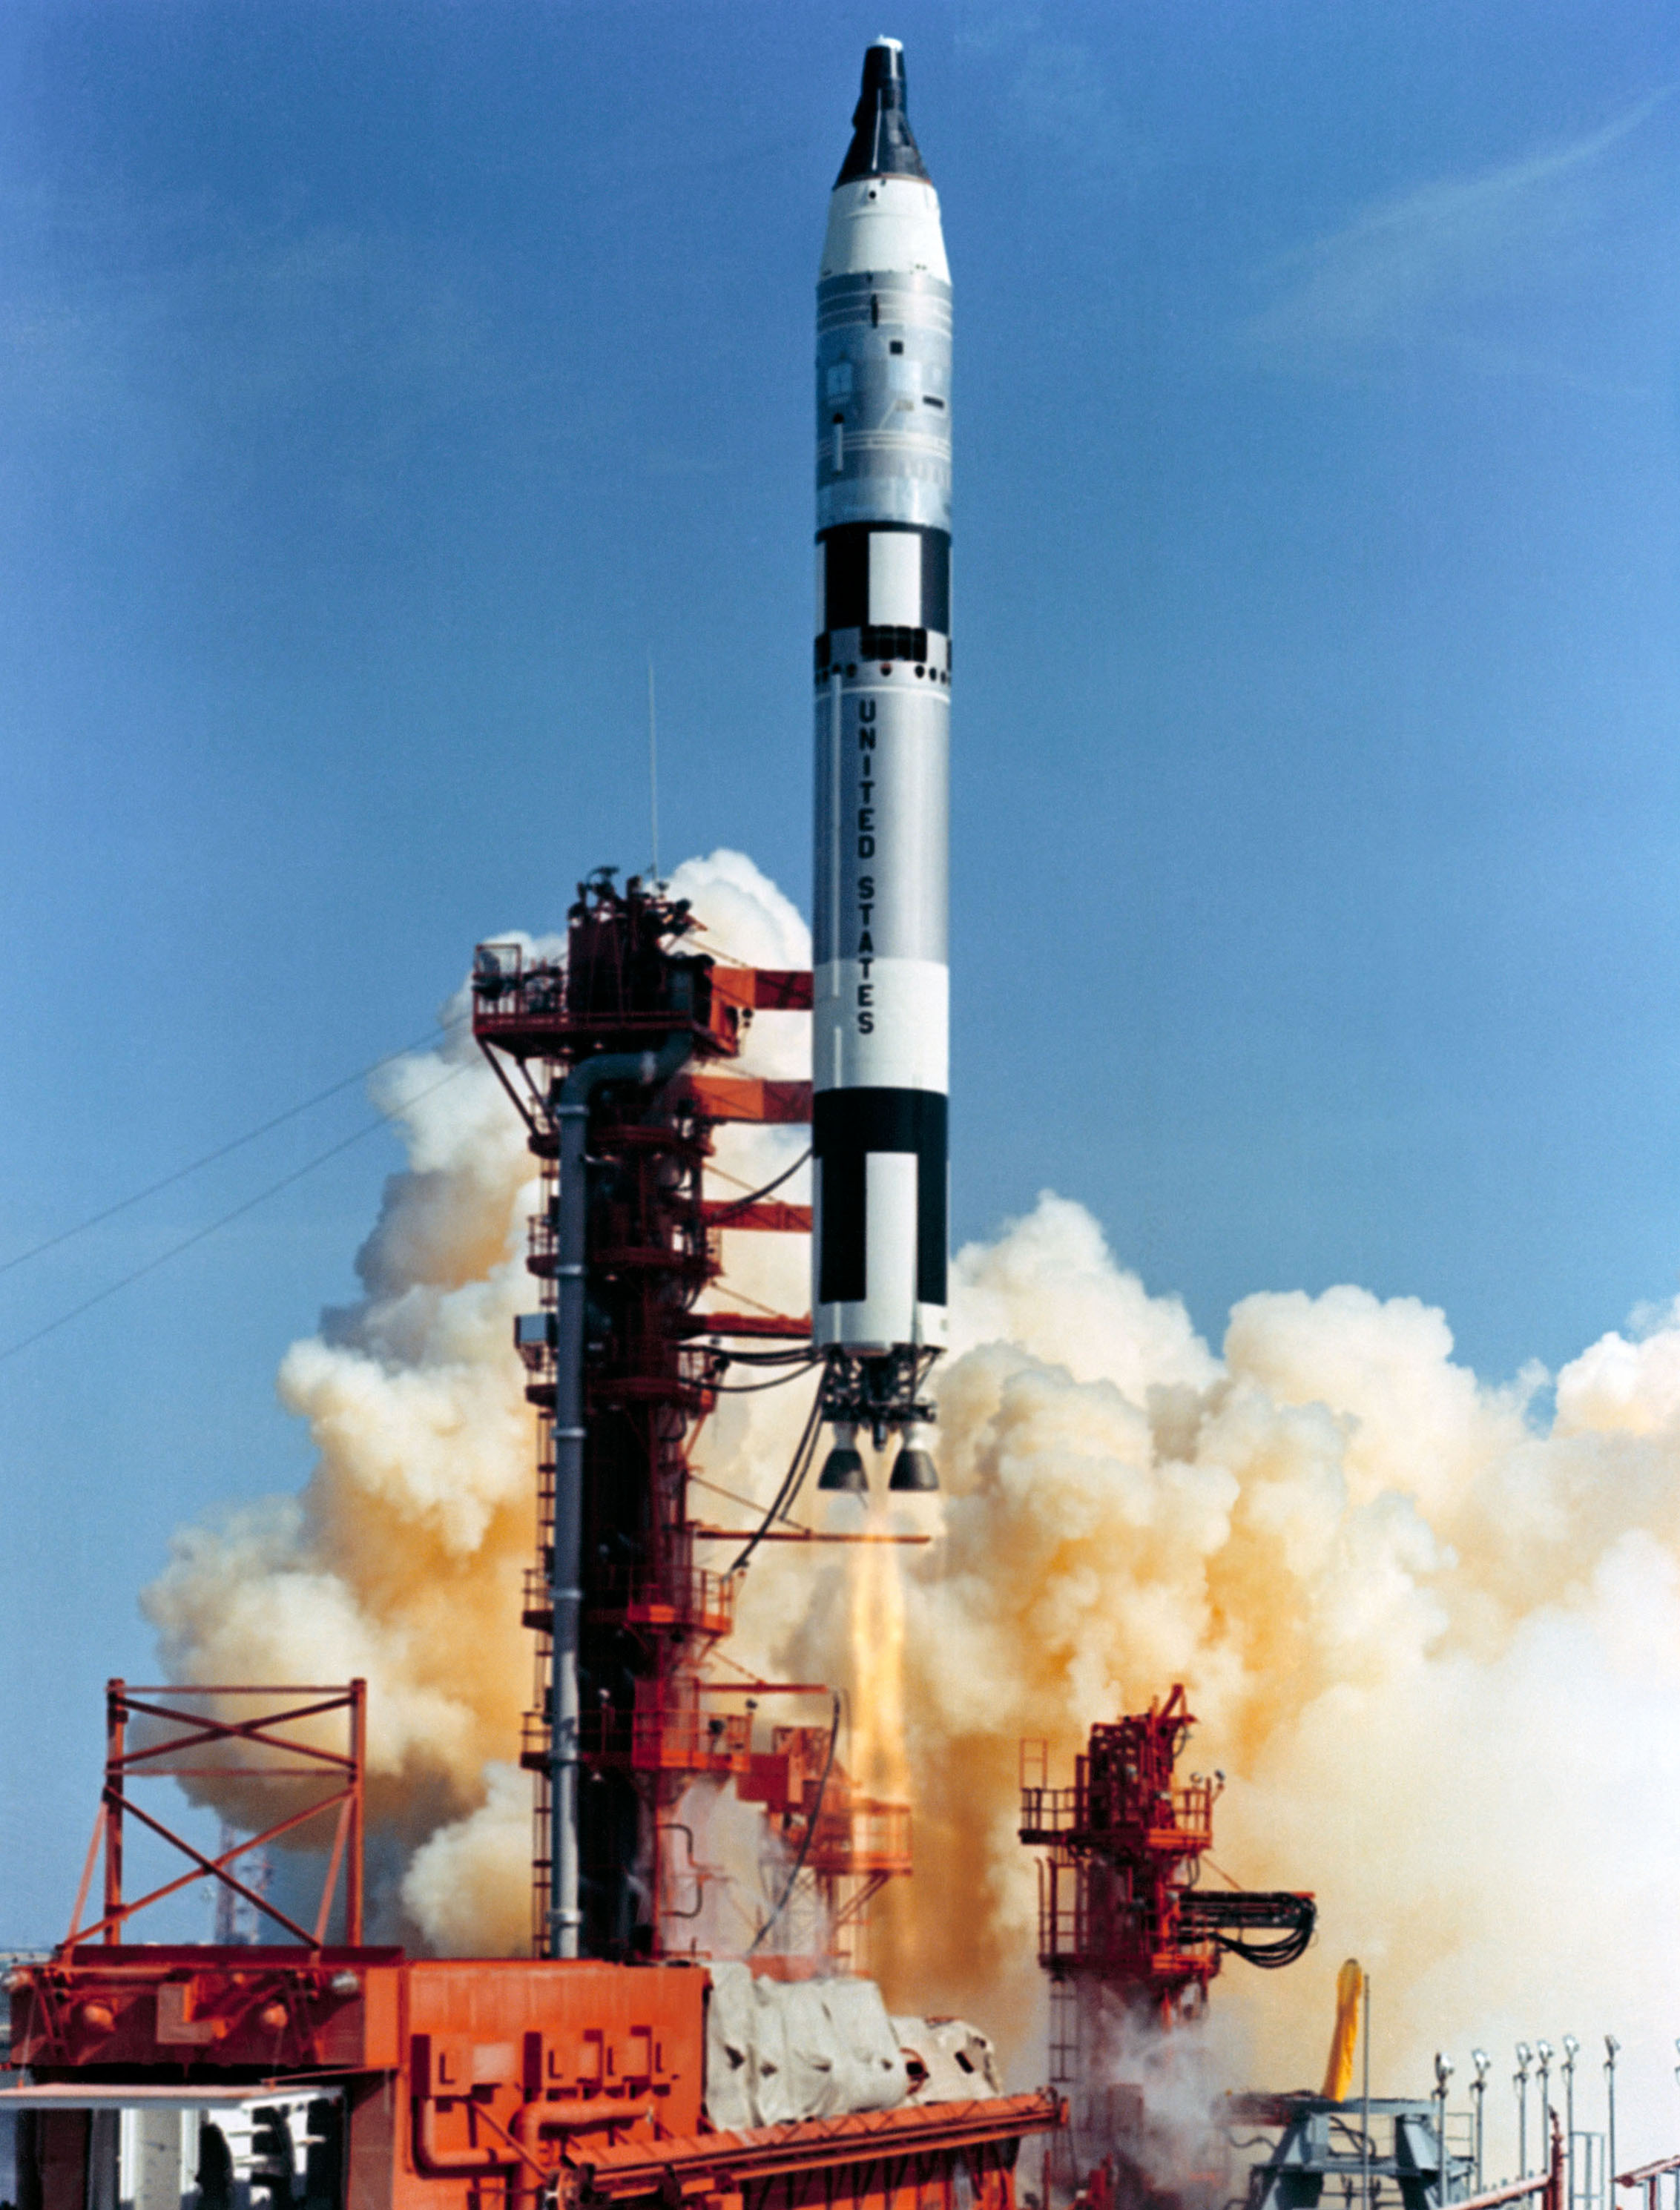 Astronauts L. Gordon Cooper, Jr., and Charles "Pete" Conrad, Jr., lift of from Launch Complex 19, Kennedy Space Center, Cape Canaveral Florida, at 13:59:59 UTC, 21 August 1965. This would be an 8-day mission. (NASA)